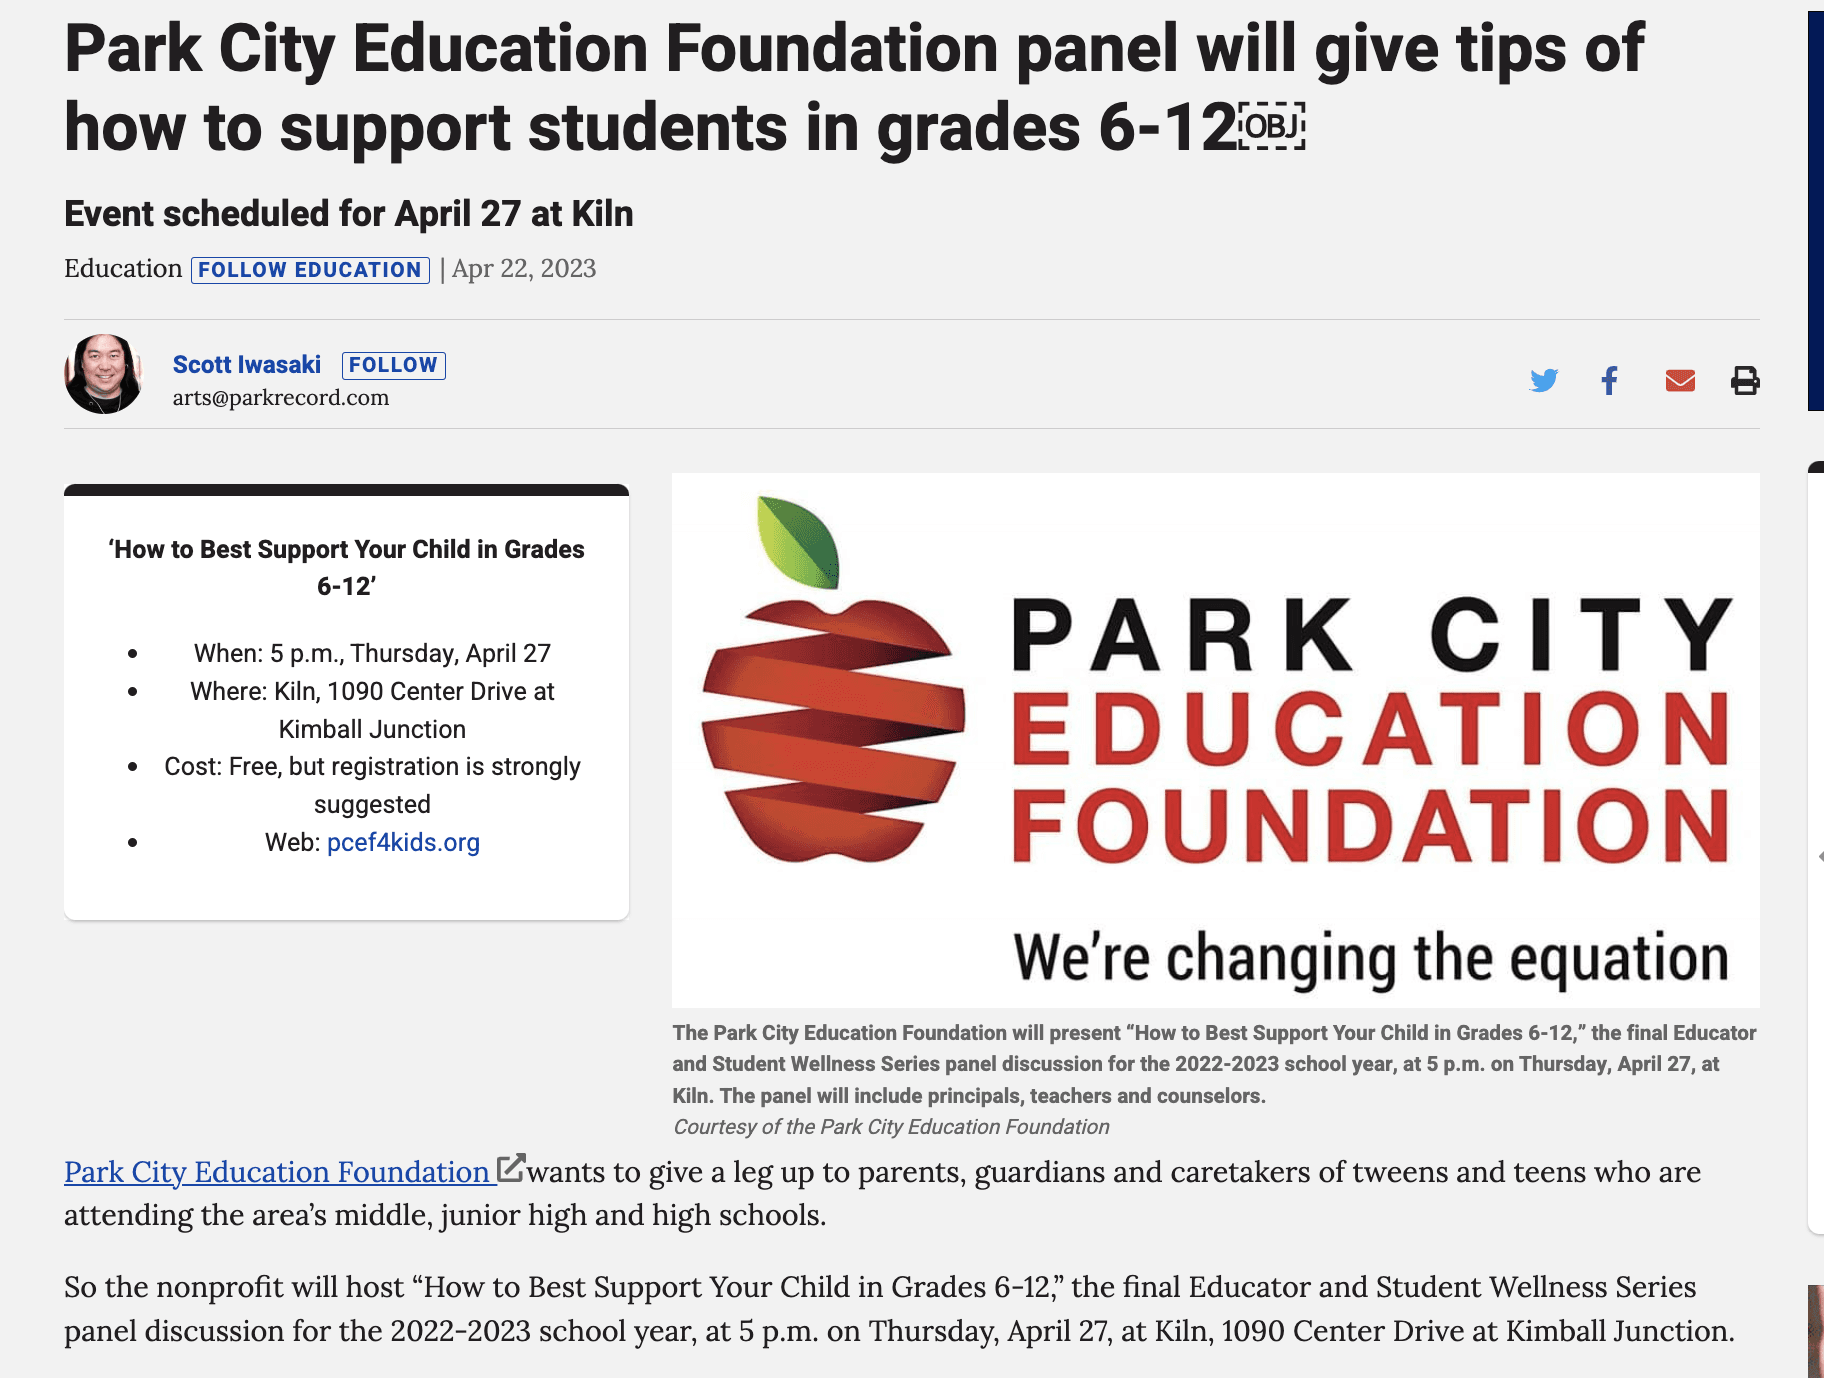 Park City Education Foundation panel will give tips of how to support students in grades 6-12